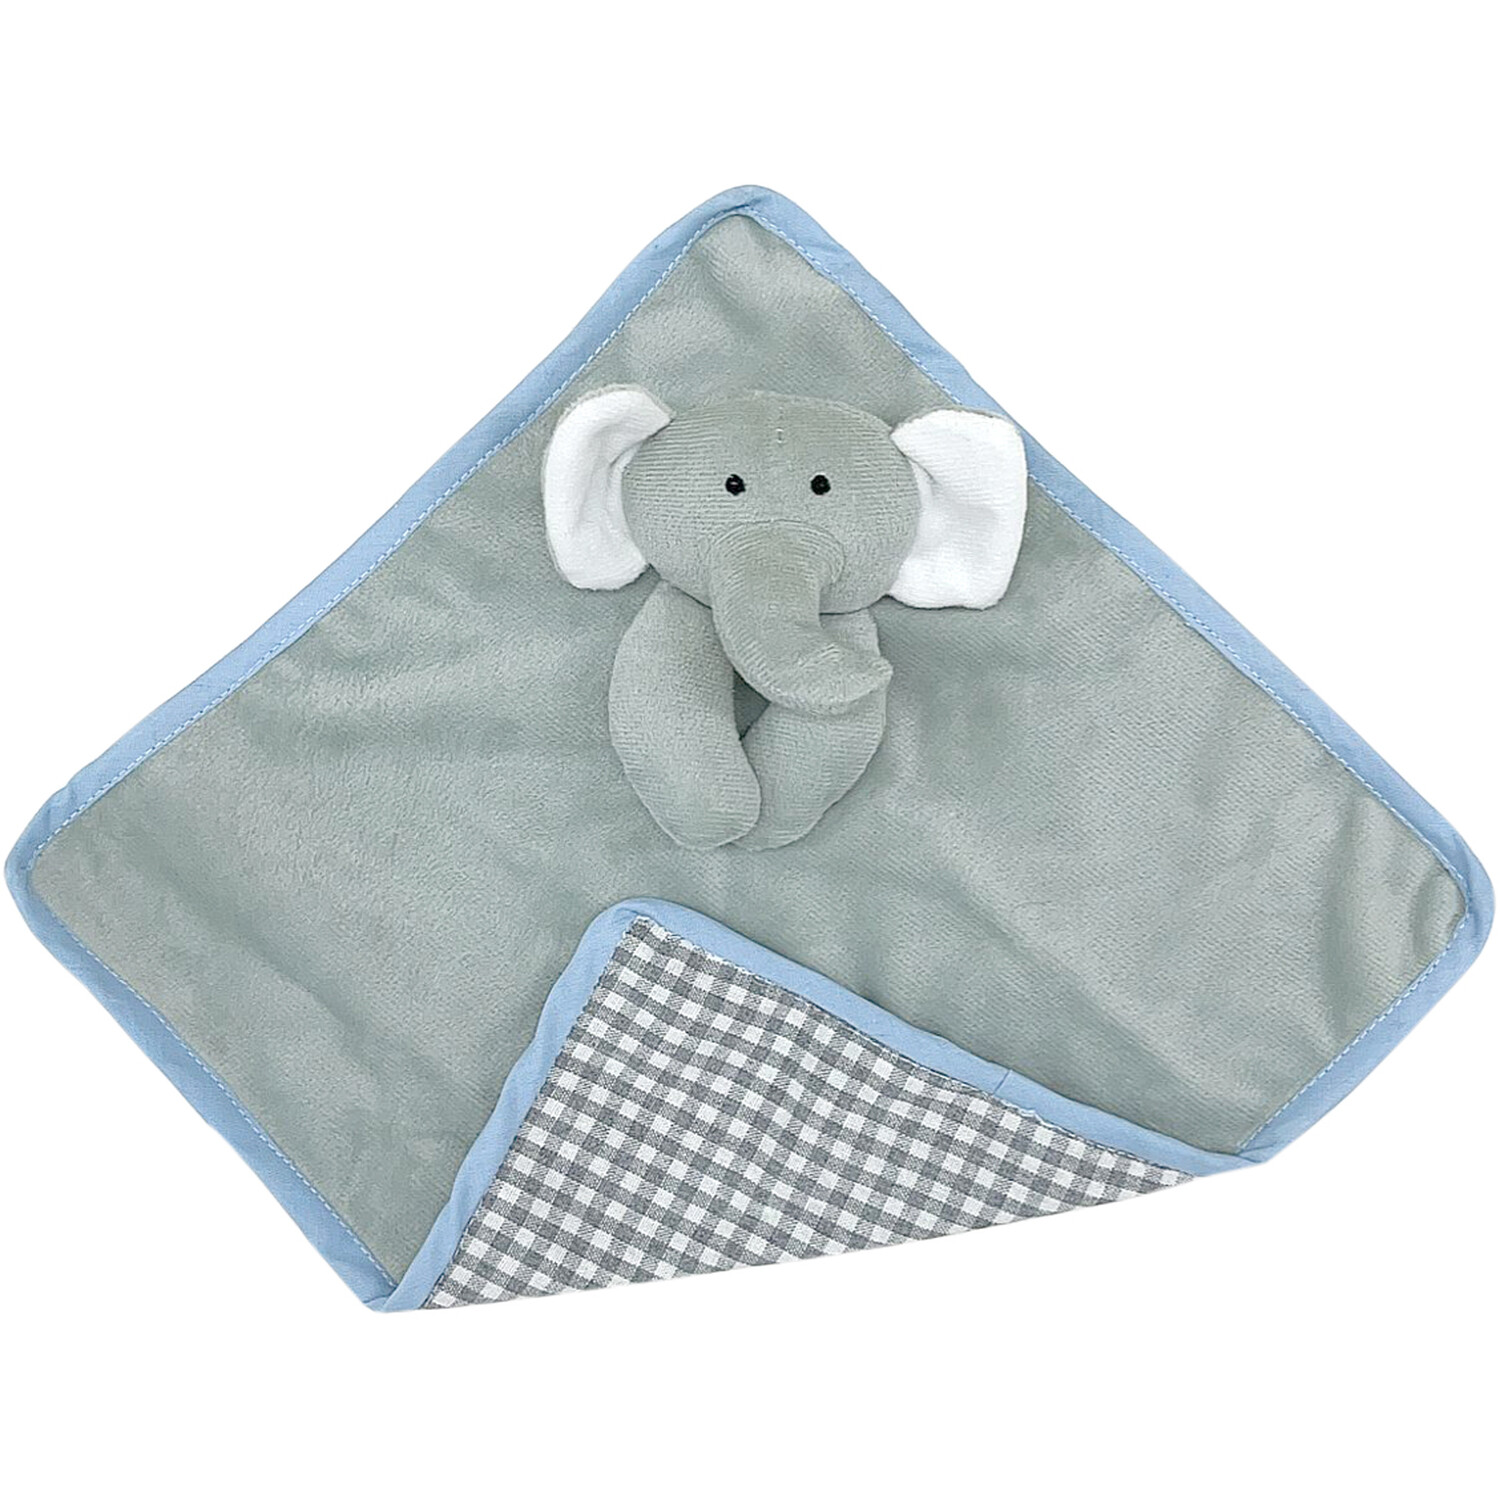 Clever Paws Comforter Grey Elephant Dog Toy Image 2